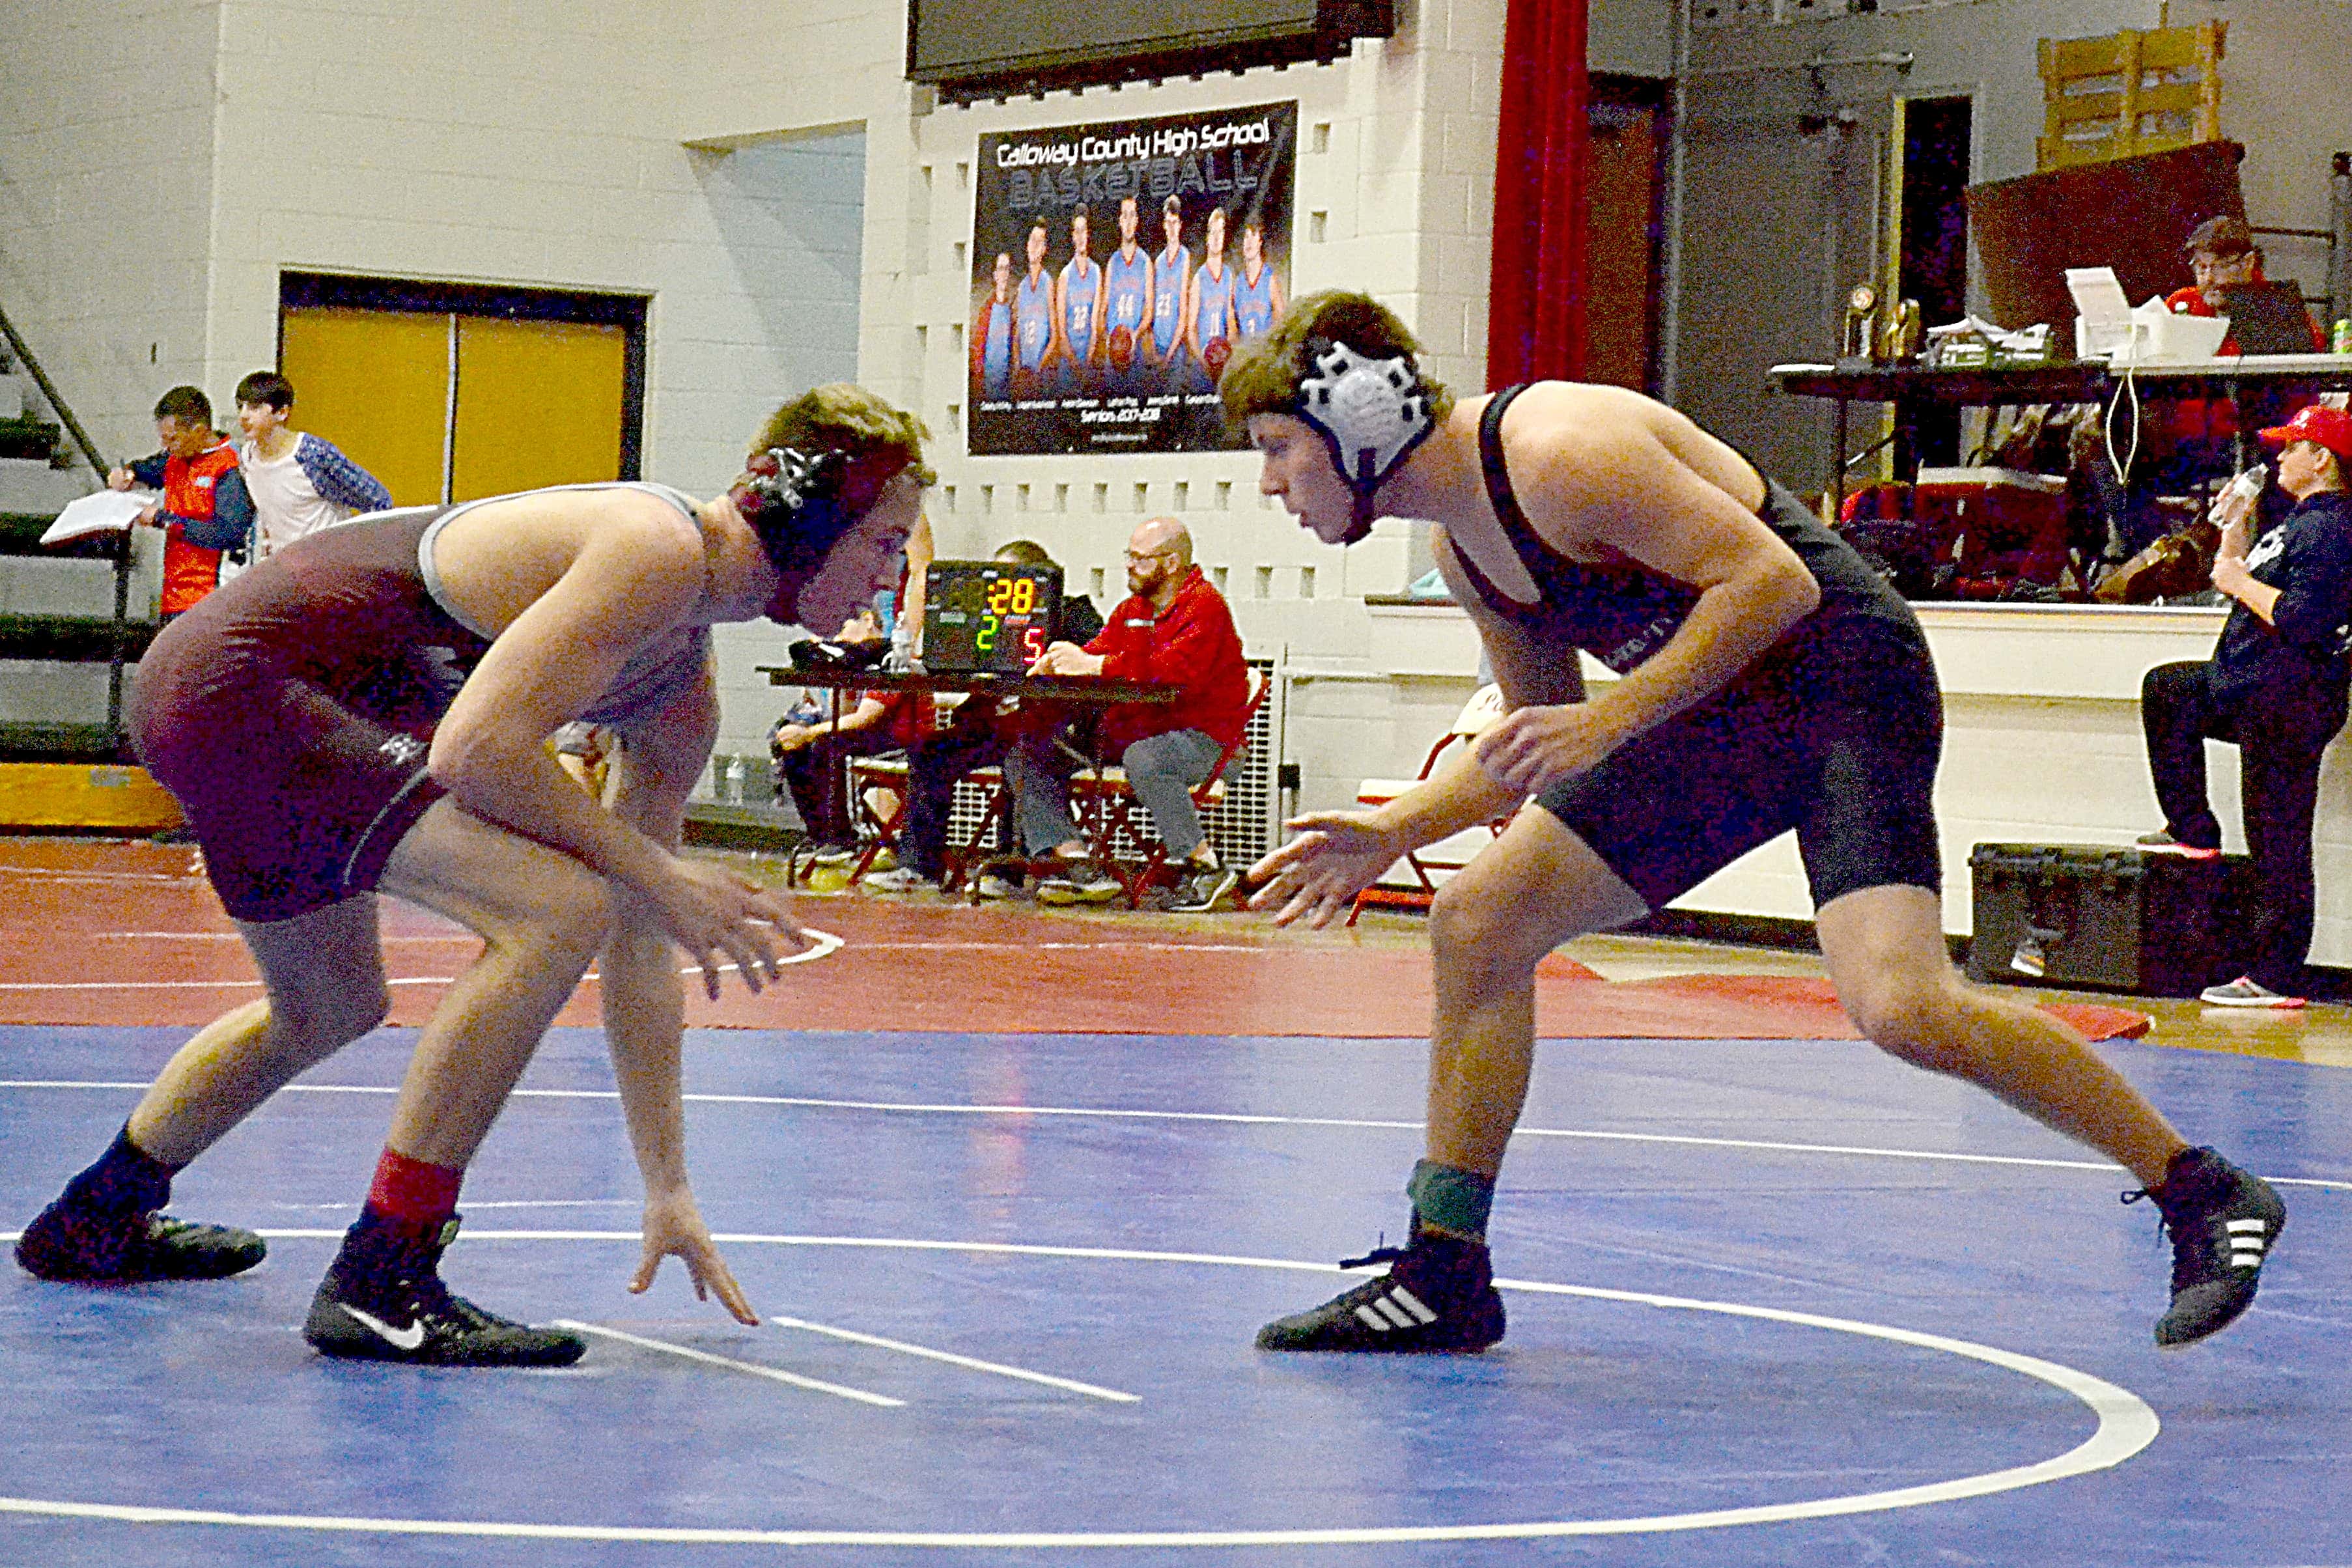 Trigg sophomore Alex Spears (right) faces off against McCracken County's Hunter Vlach. Spears was 1-2 for the day at 145 lbs.